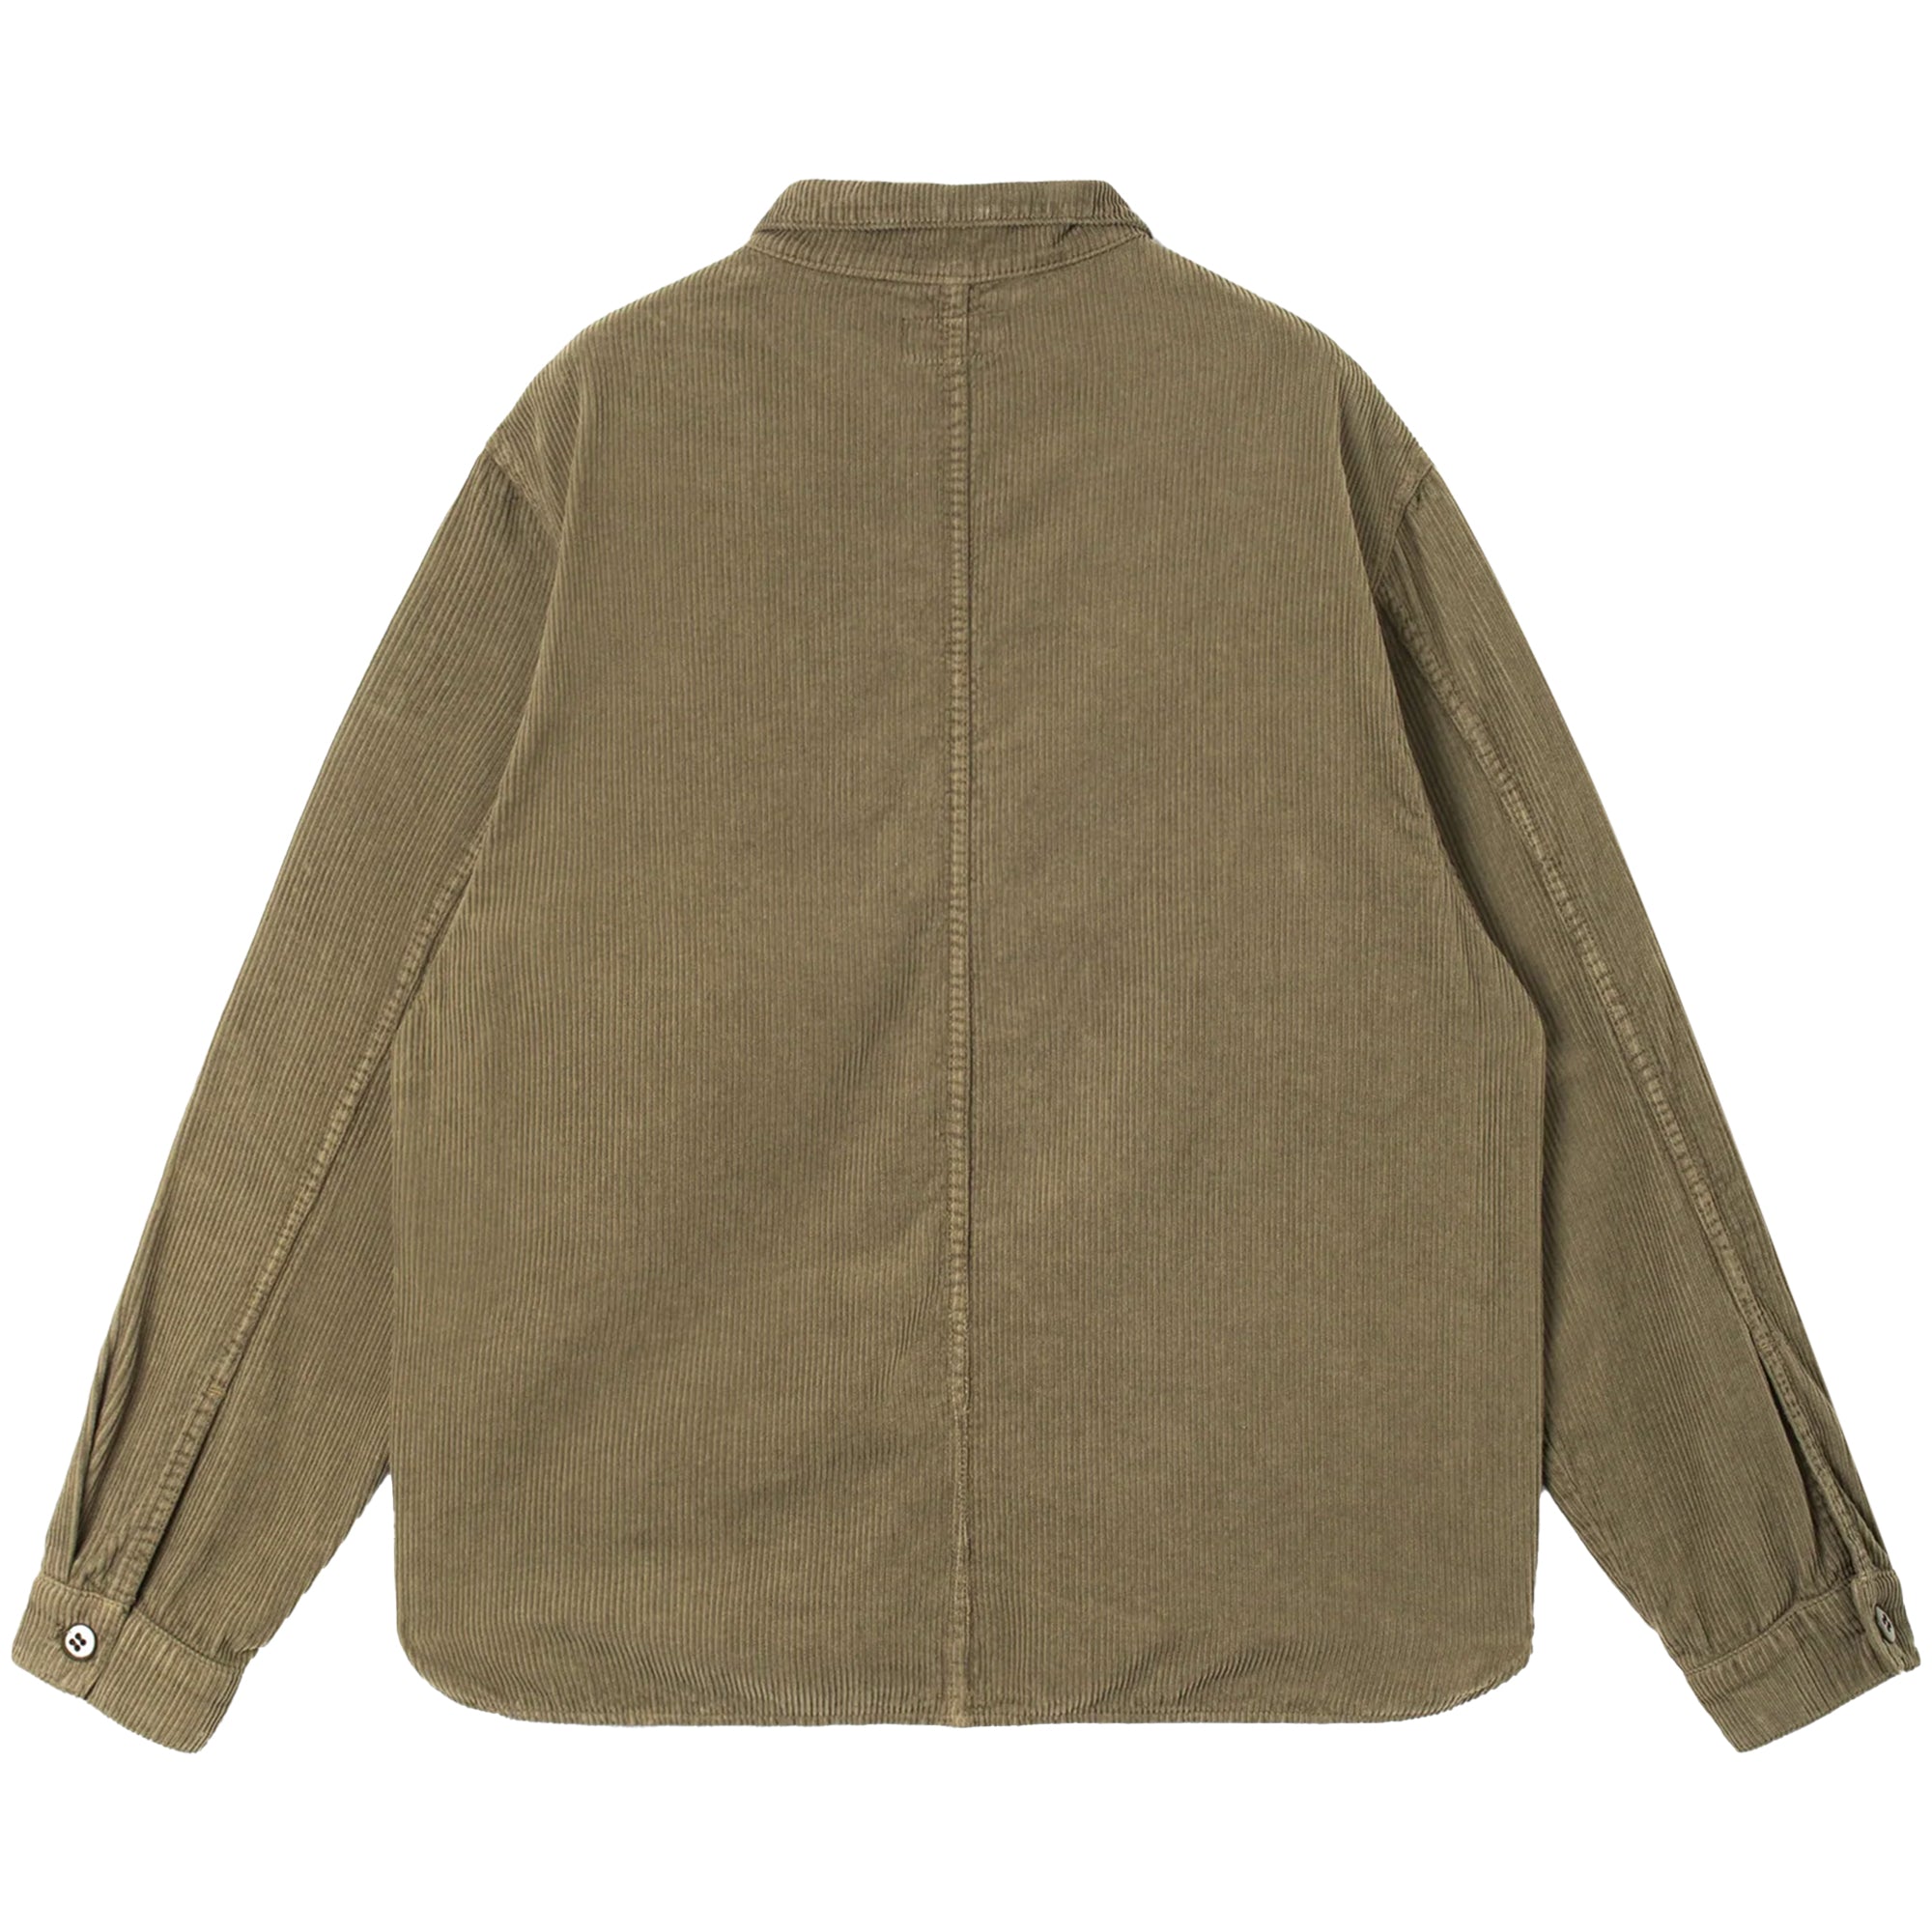 Stan Ray Painters Shirt - Olive Cord